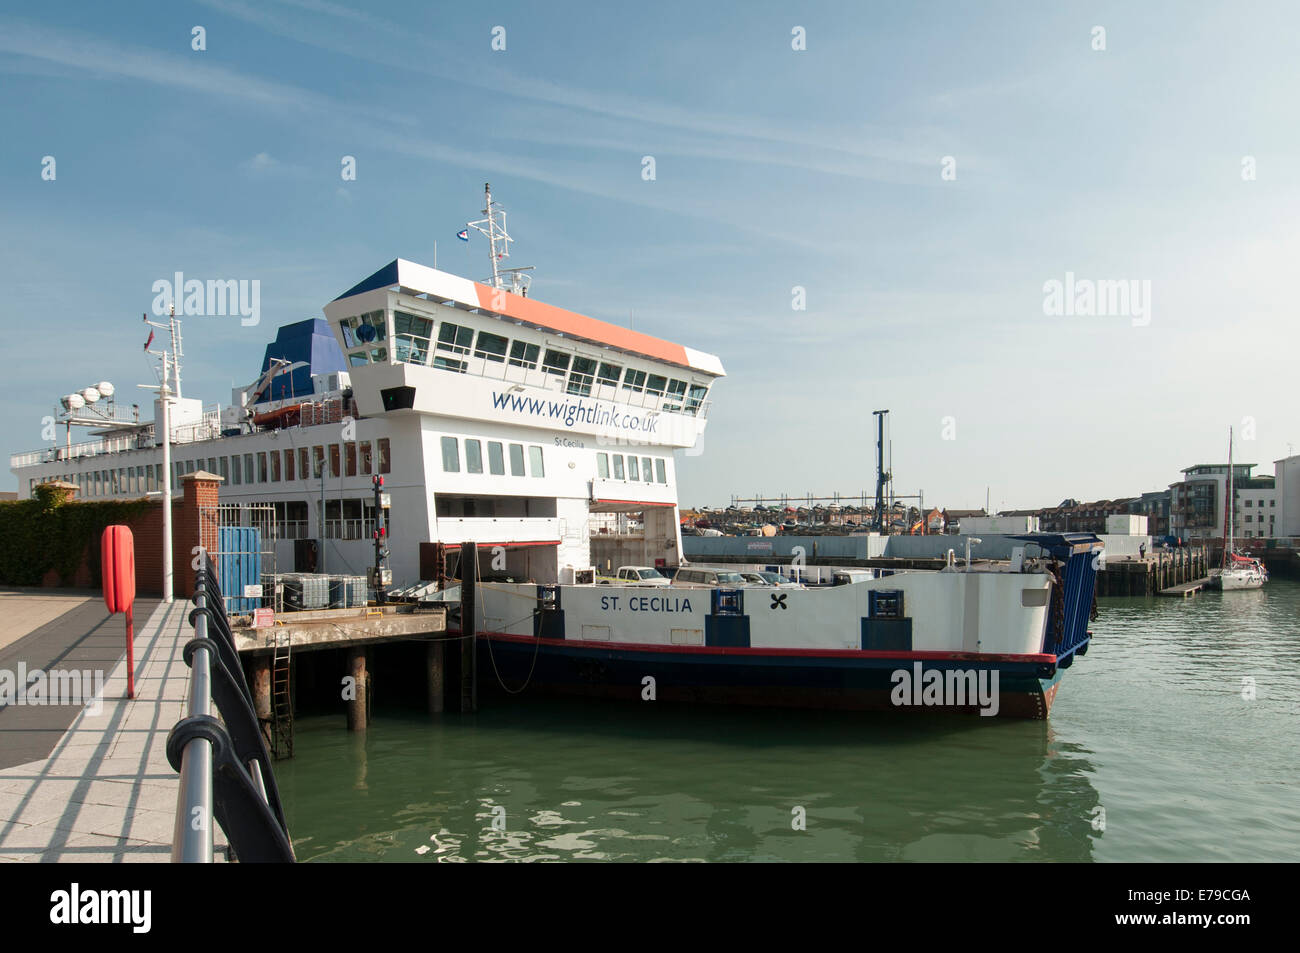 St Cecilia, Wightlink Isle of Wight ferry at Camber dock in Portsmouth Harbour Stock Photo